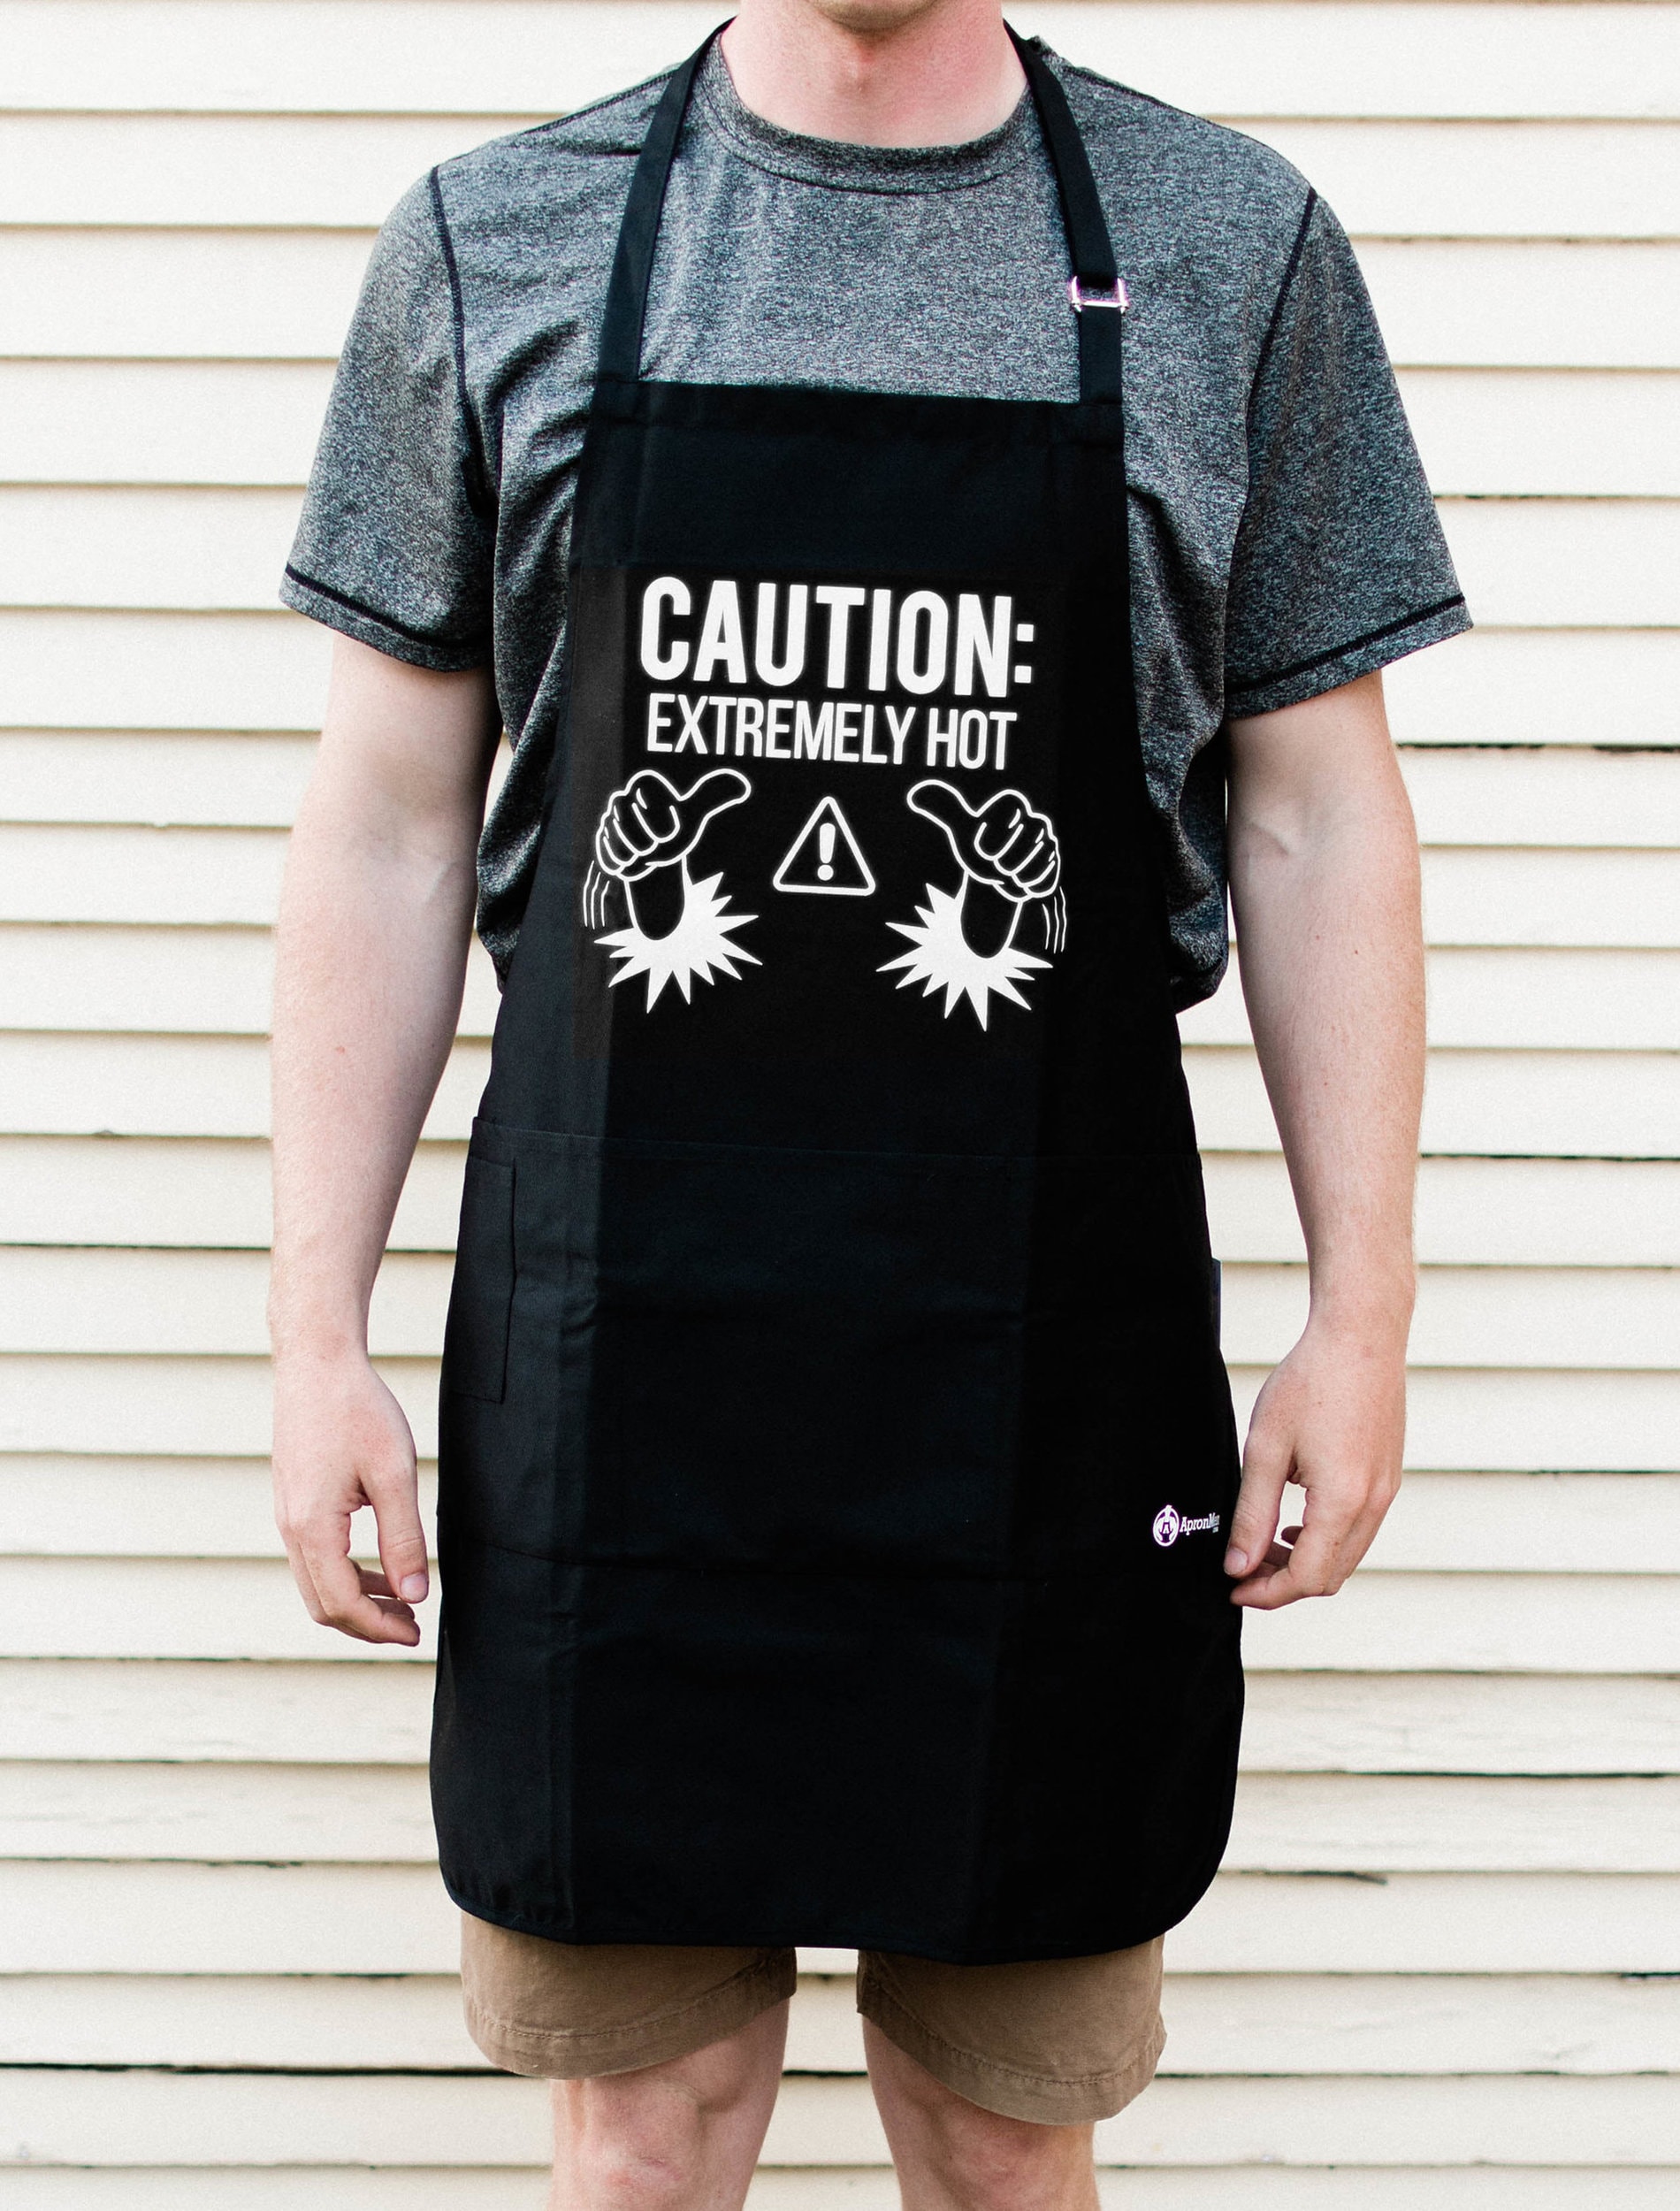 Extremely Hot Apron Grill BBQ Funny Apron Gift for Dad by ApronMen Caution